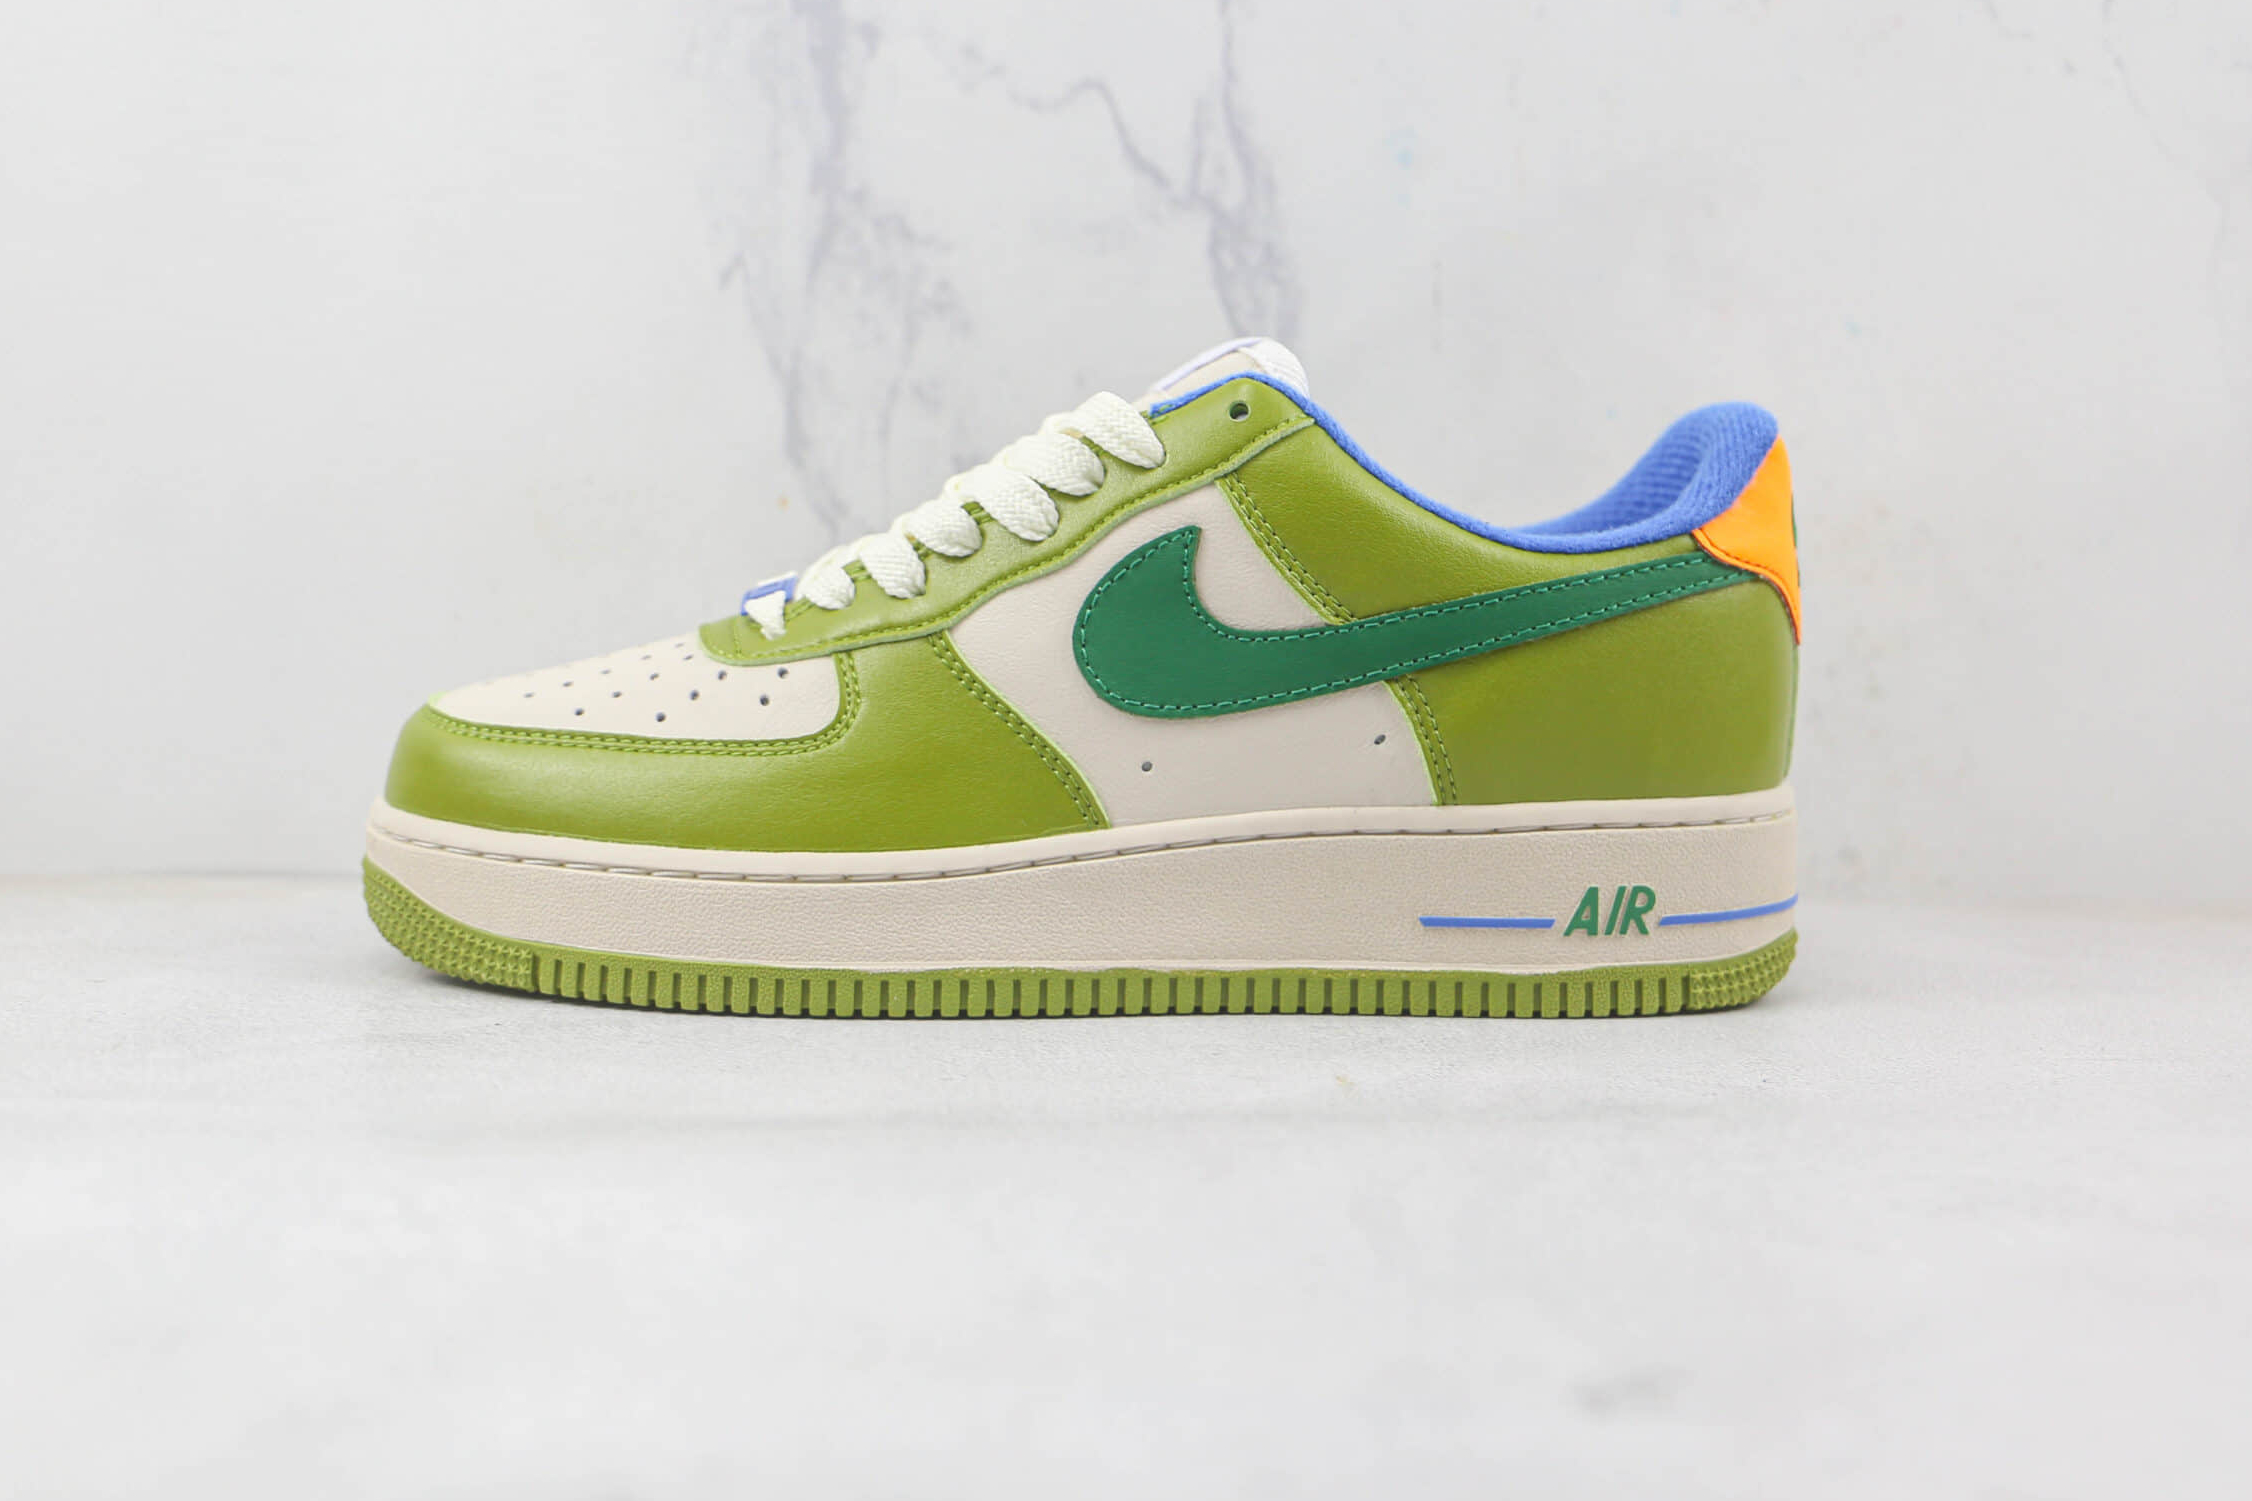 Nike Air Force 1 07 Low Avocado Green Blue Yellow DB2812-001 - Stylish and Colorful Sneakers